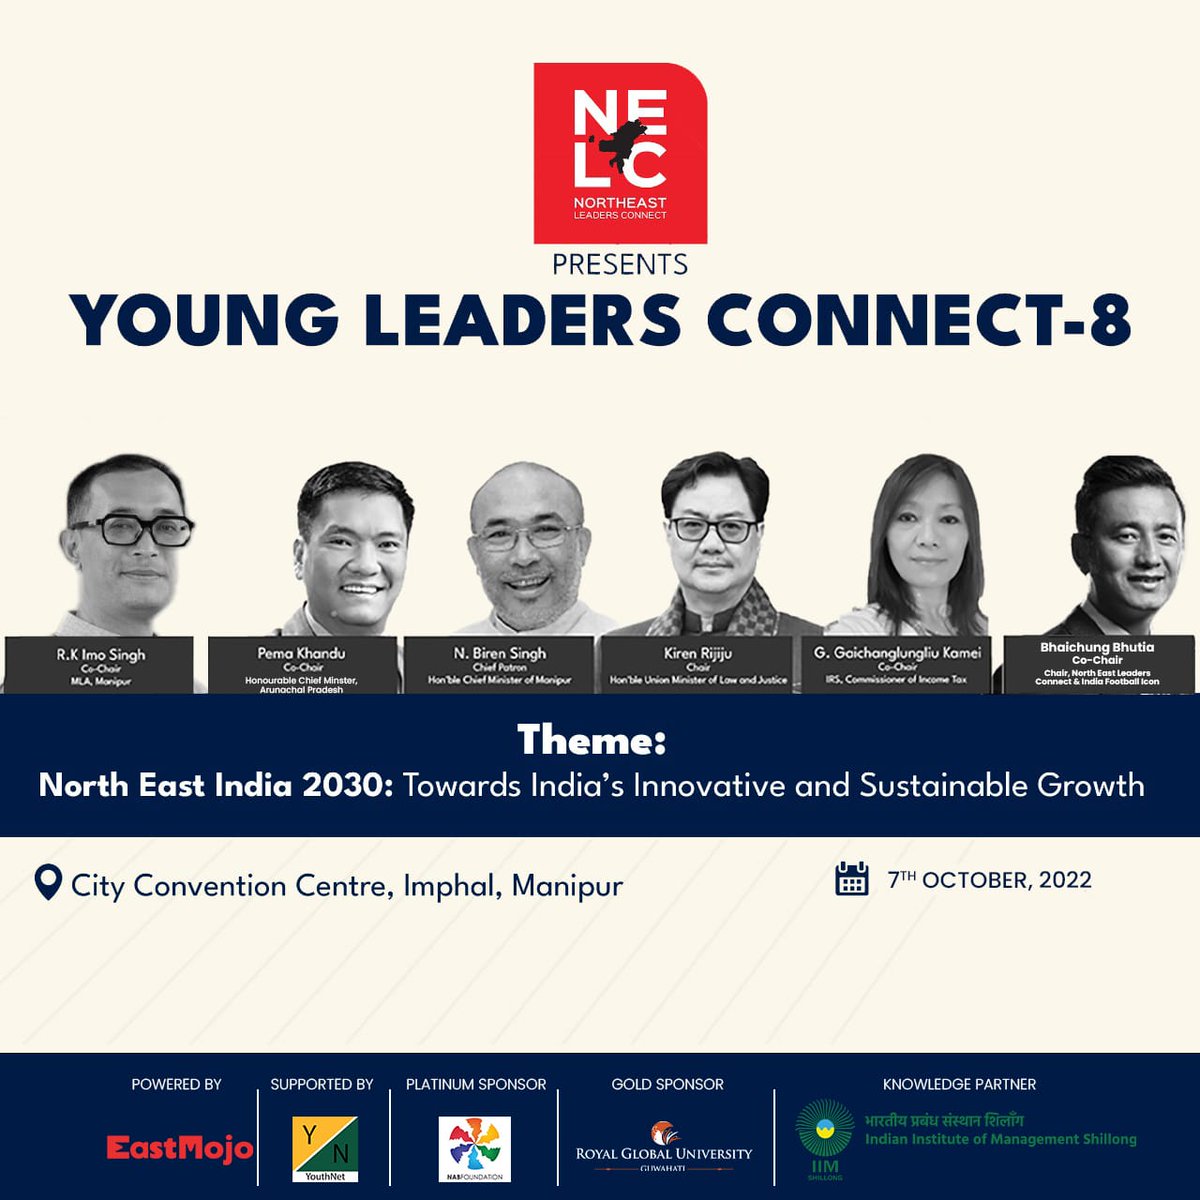 North East Leaders Connect (NELC) is thrilled to present the Chair, Co-Chairs and the Chief Patron for the 8th Edition of NELC’s Young Leaders Connect to be held at Imphal, Manipur. #NorthEastIndia #imphal #manipur #conclave2022 #YoungLeadersConnect #YLC8 #NELC